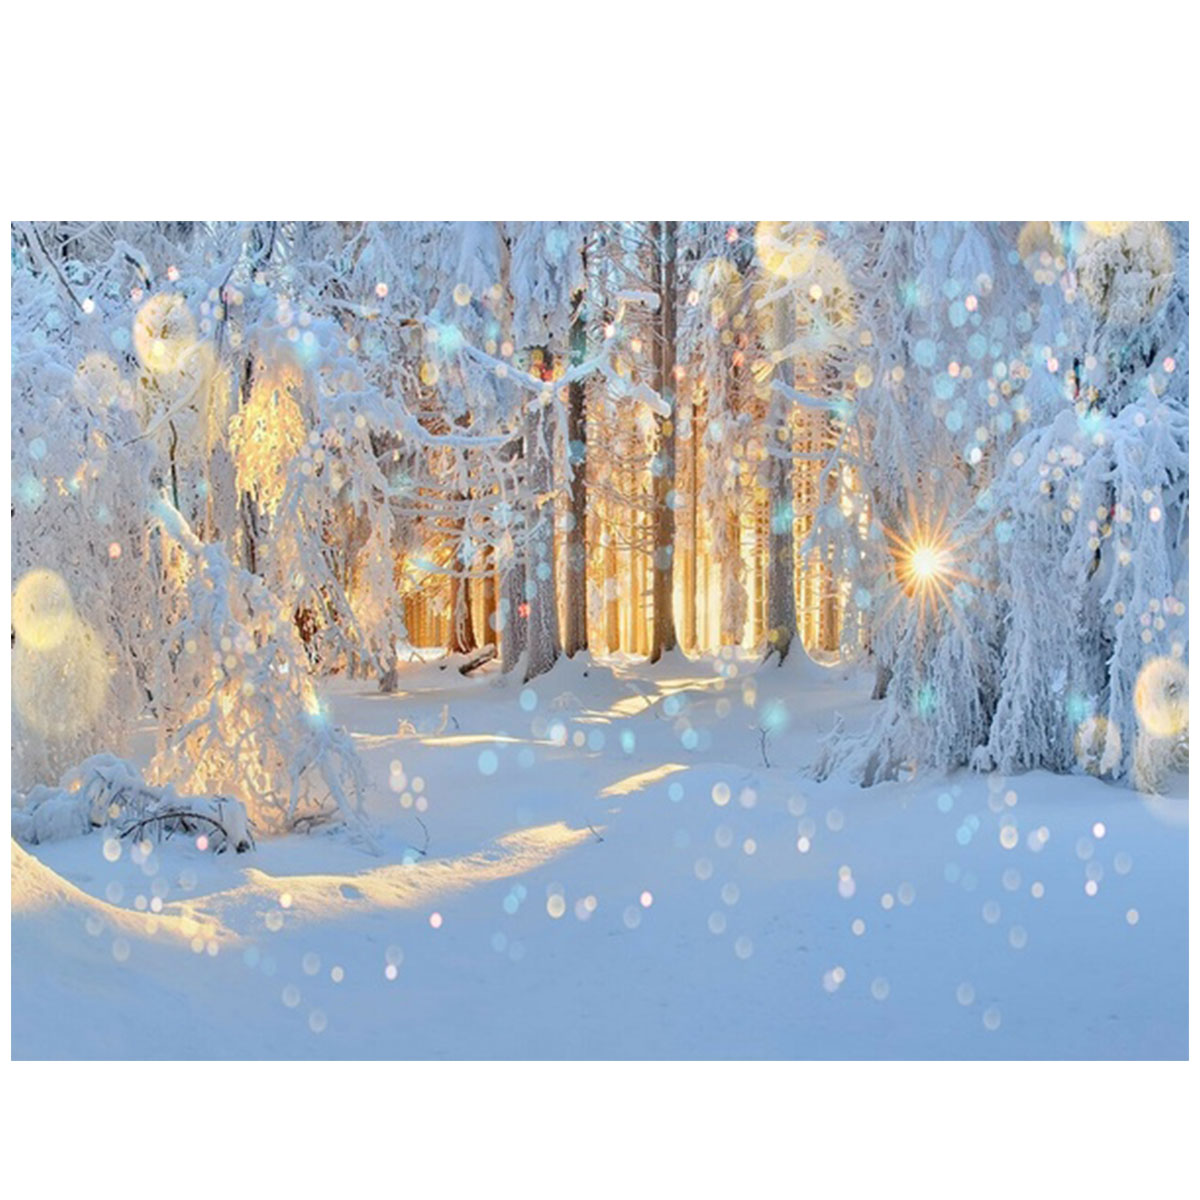 5x3FT-7x5FT-8x6FT-Winter-Snow-Light-Forest-Photography-Backdrop-Background-Studio-Prop-1609473-2